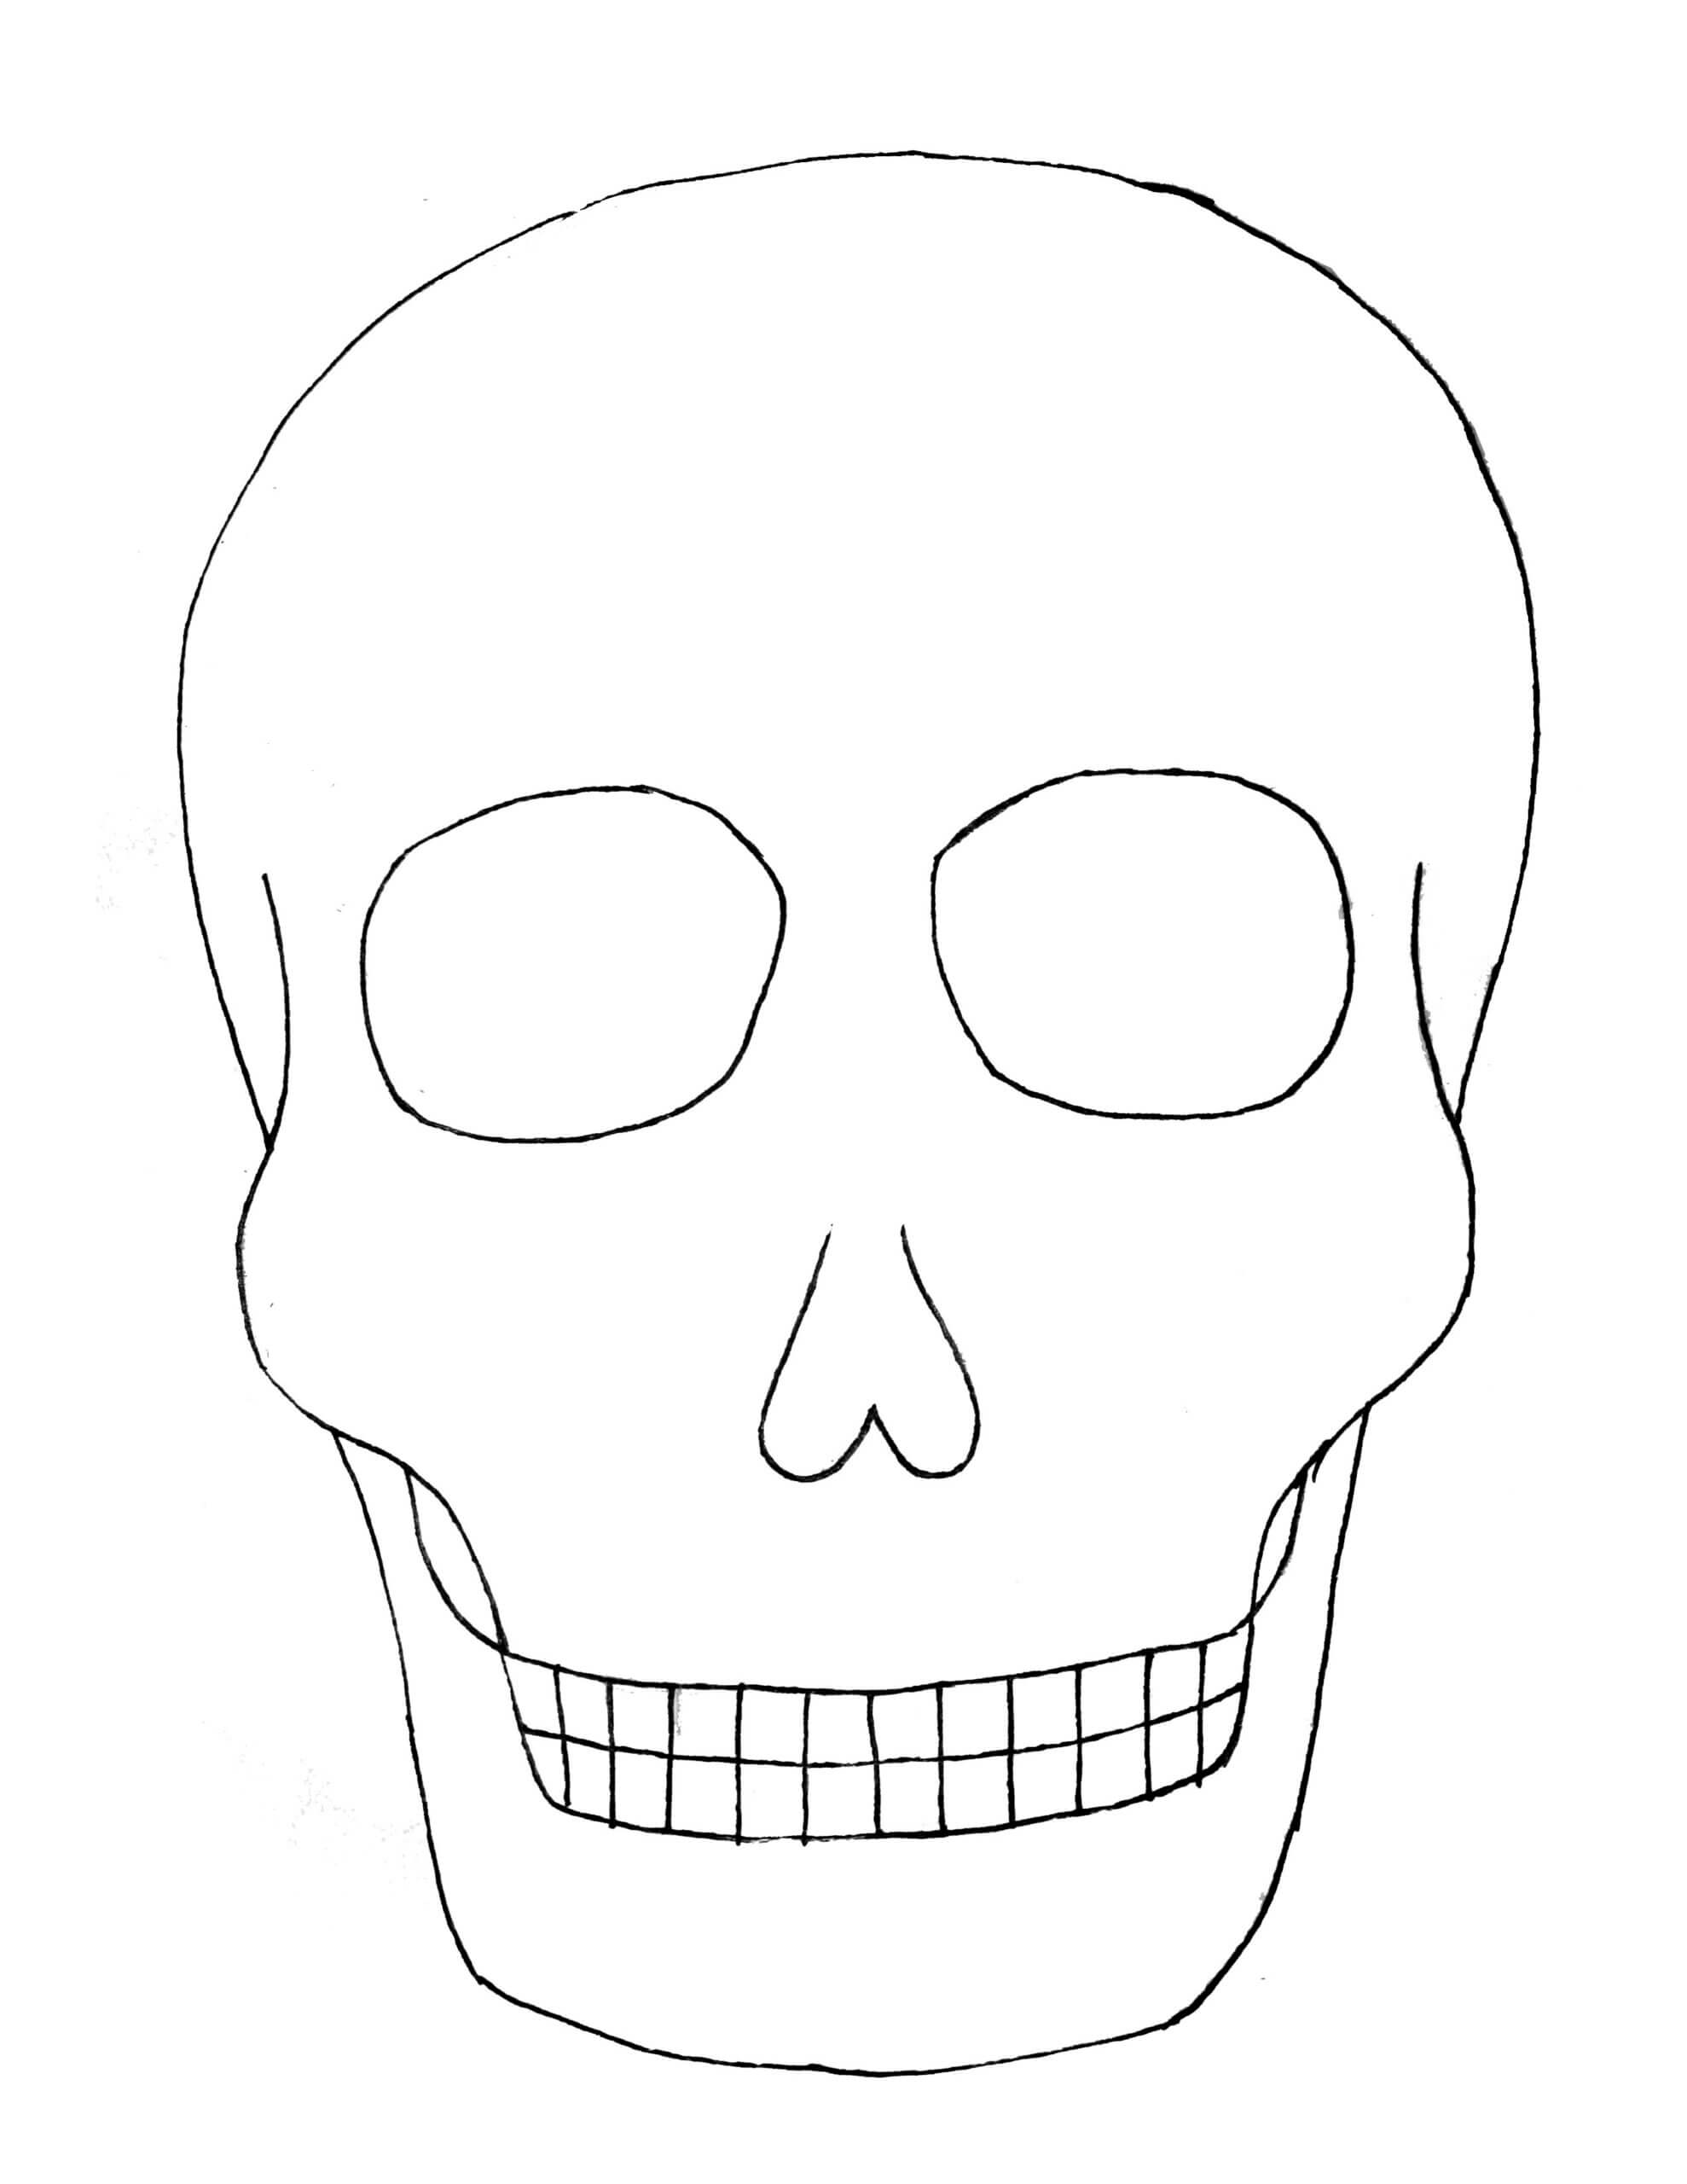 Best Coloring : Day Of The Sugar Skull Blank Template Skulls Within Blank Sugar Skull Template